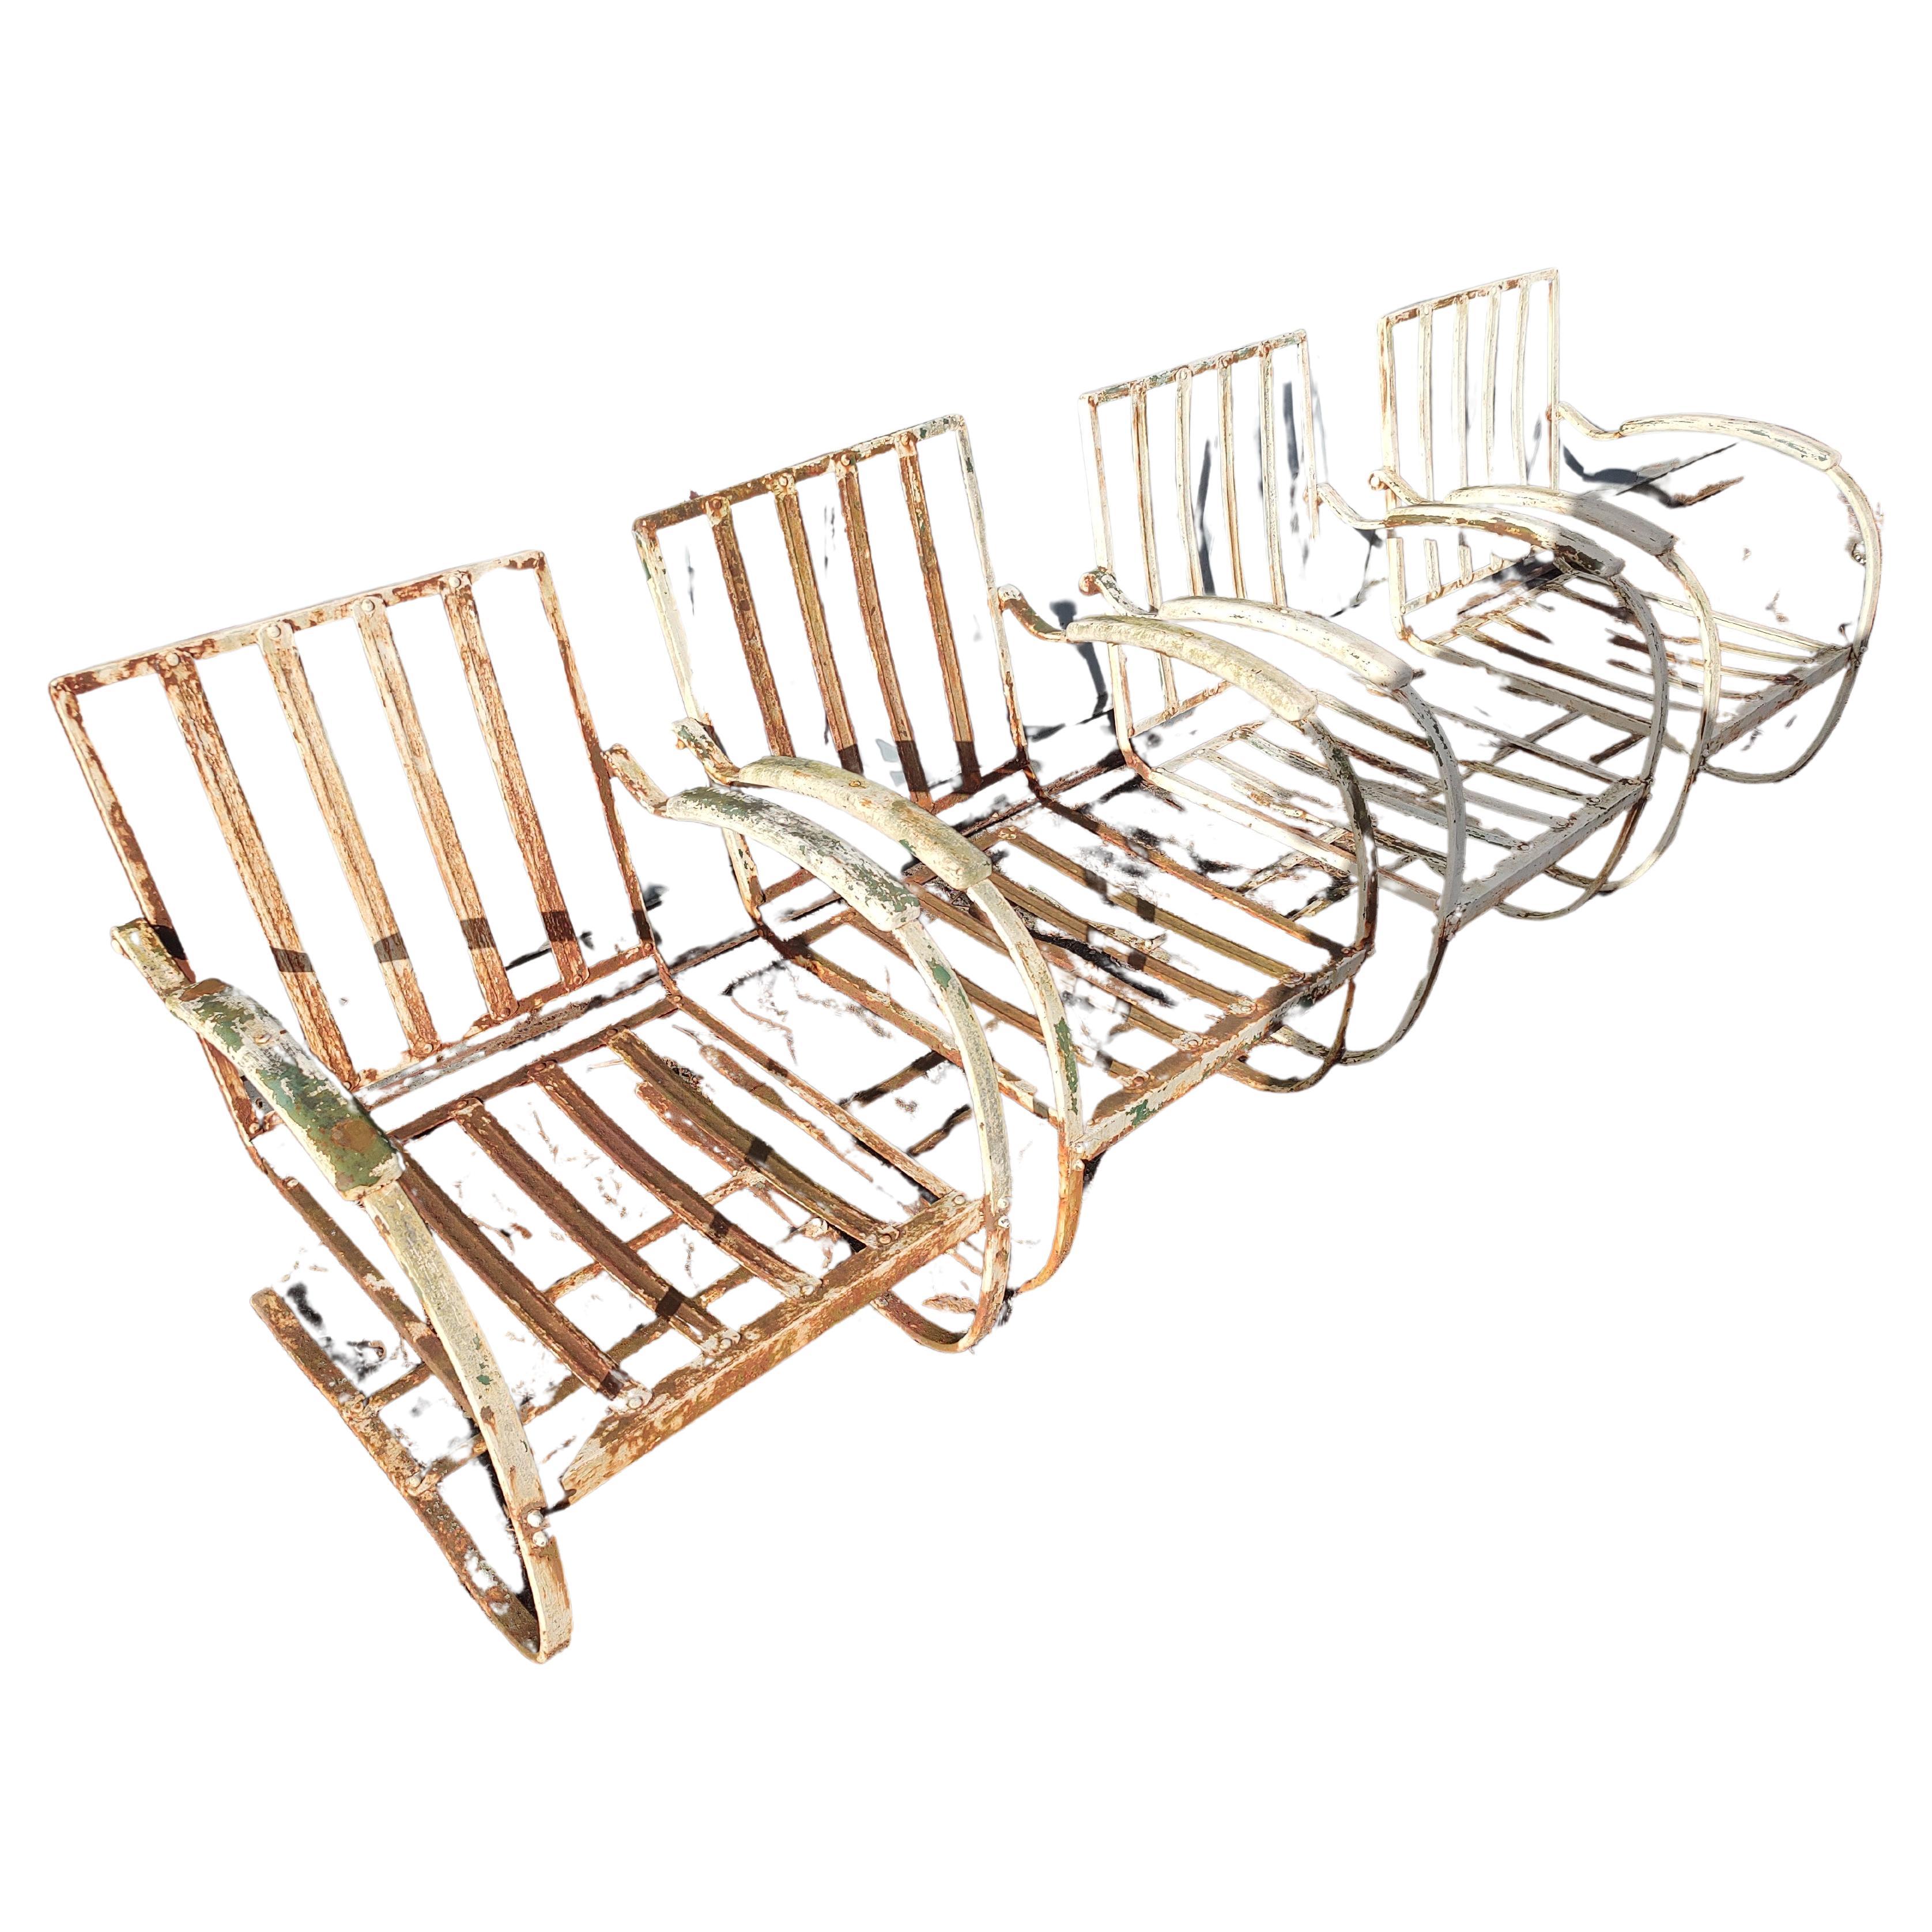 Two Pairs of Art Deco Cantilevered Spring Steel & Iron Lounge Chairs C1948 In Good Condition For Sale In Port Jervis, NY